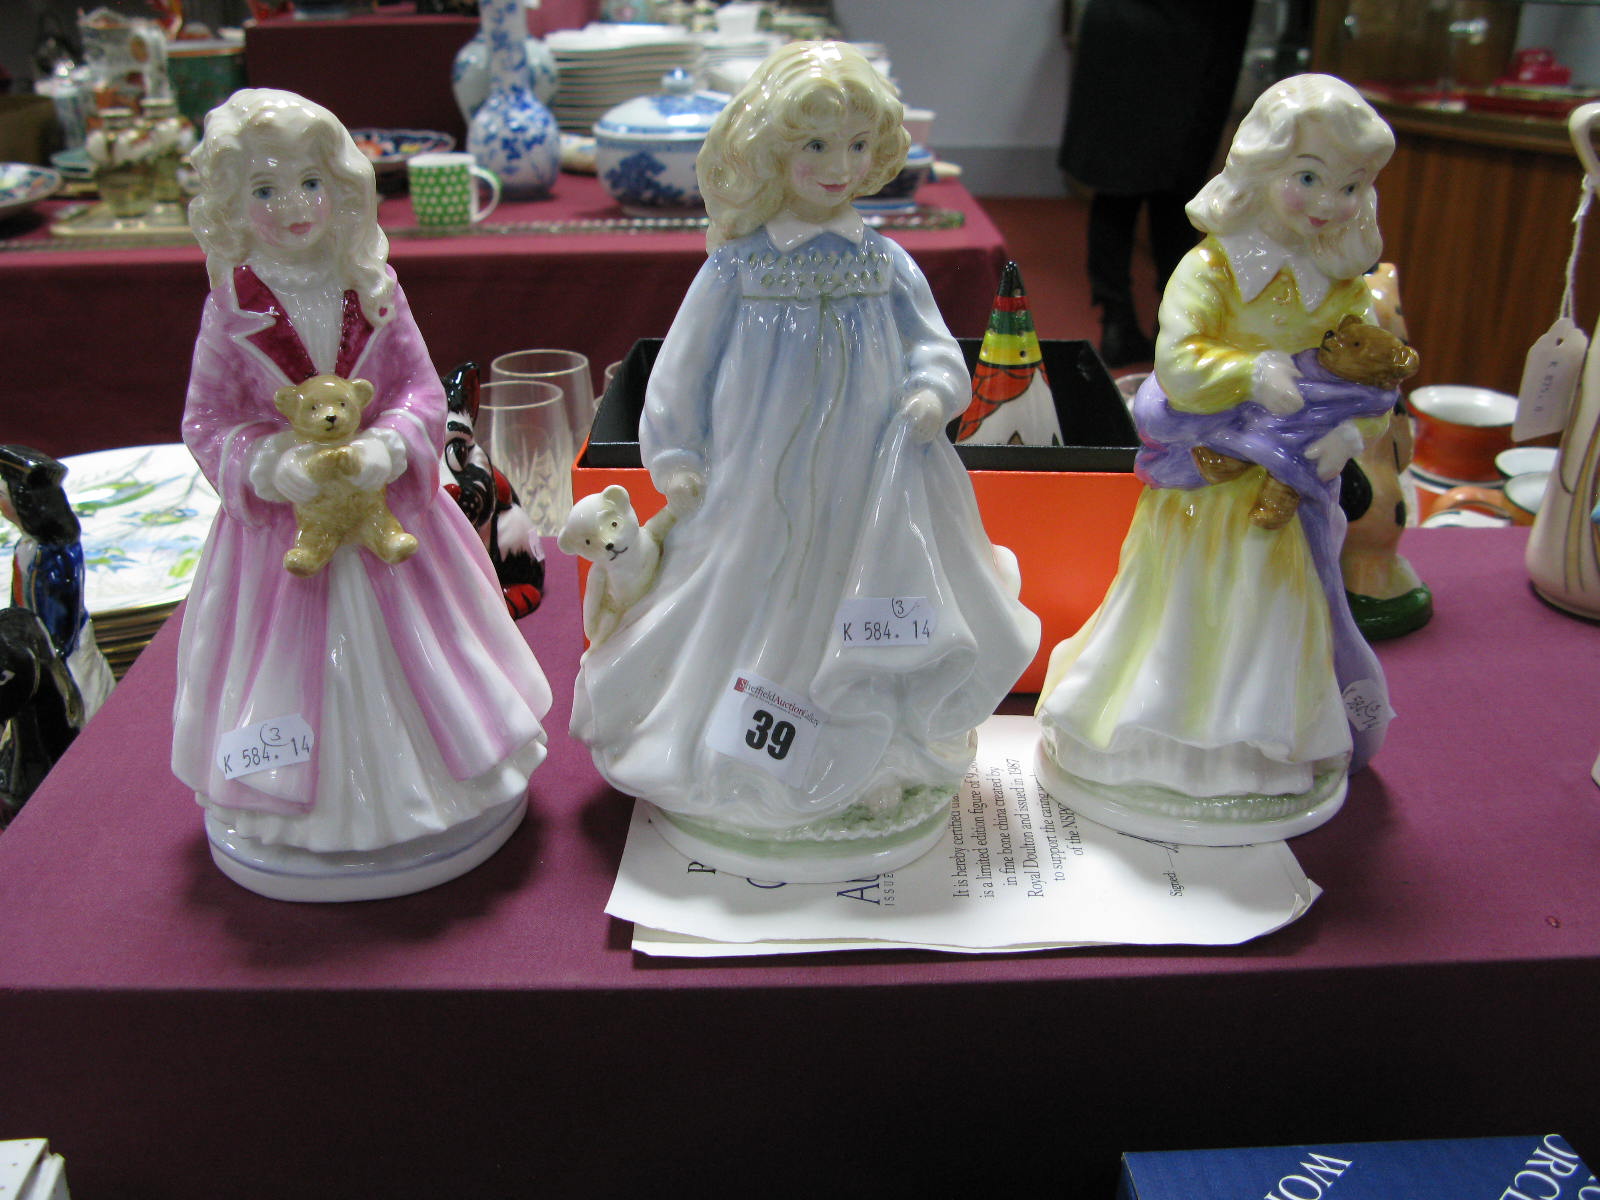 Royal Doulton Figurines - Faith HN3082, Hope HN3061 and Charity HN3087, each produced to support the